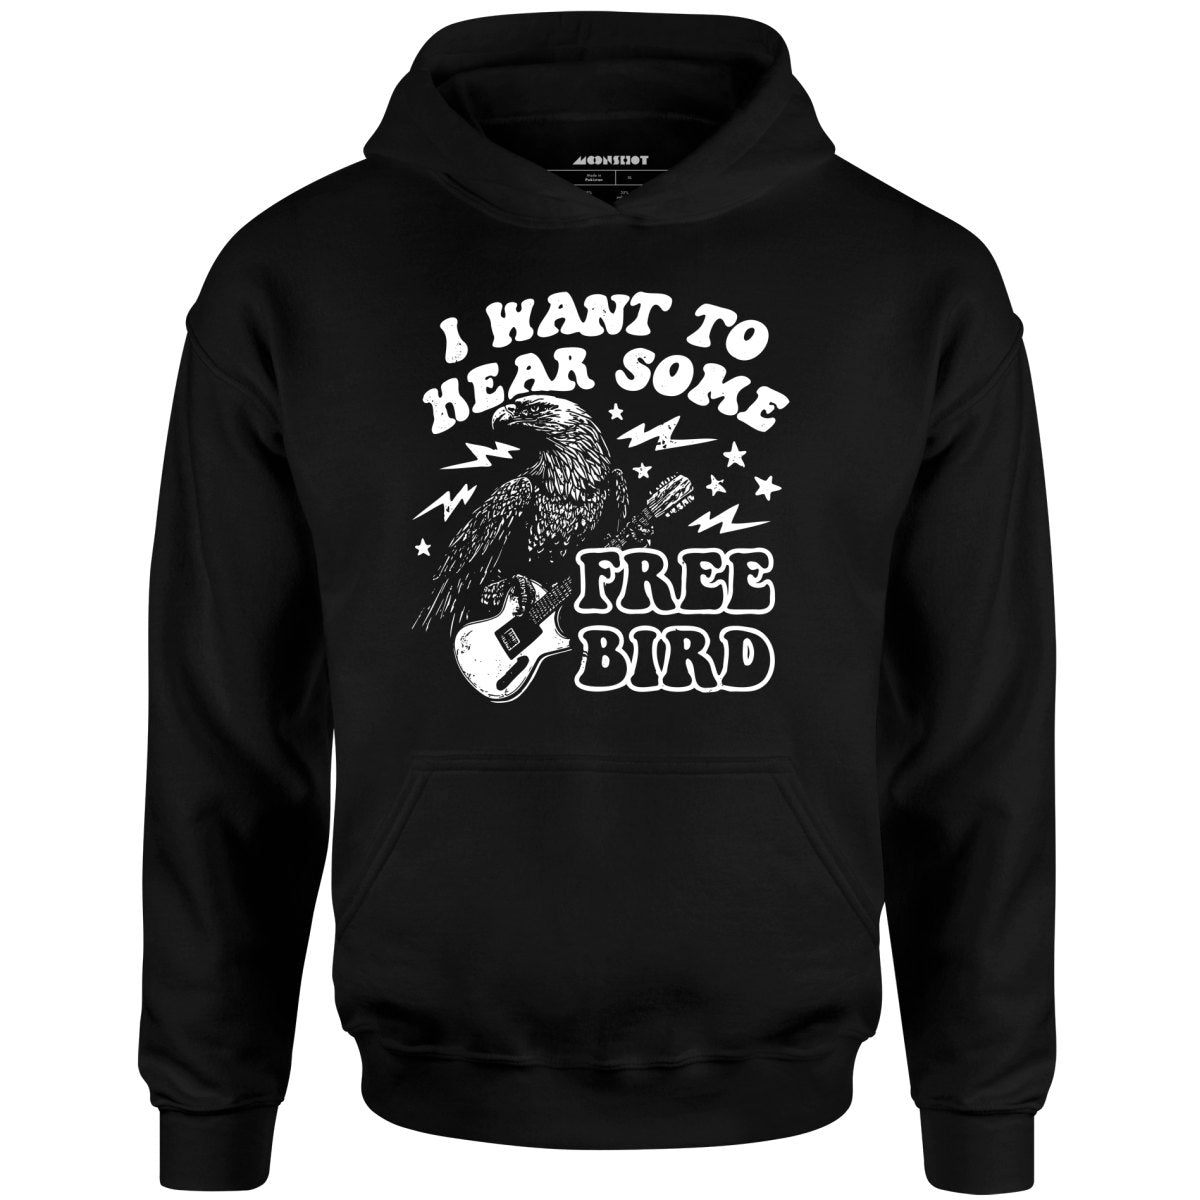 I Want to Hear Some Free Bird - Unisex Hoodie